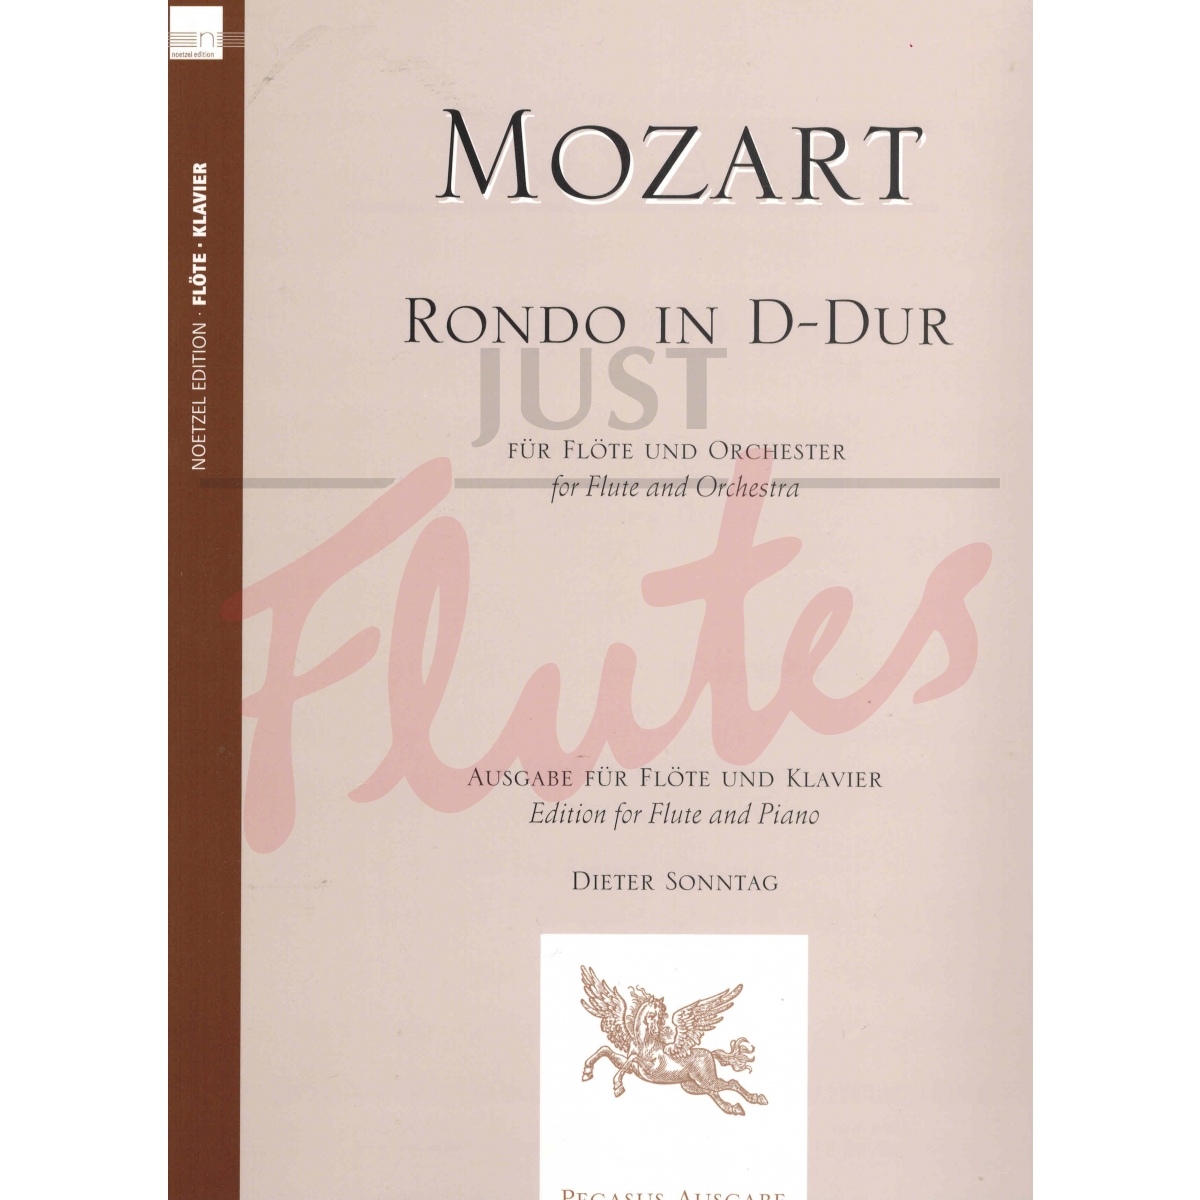 Rondo in D major for flute and piano